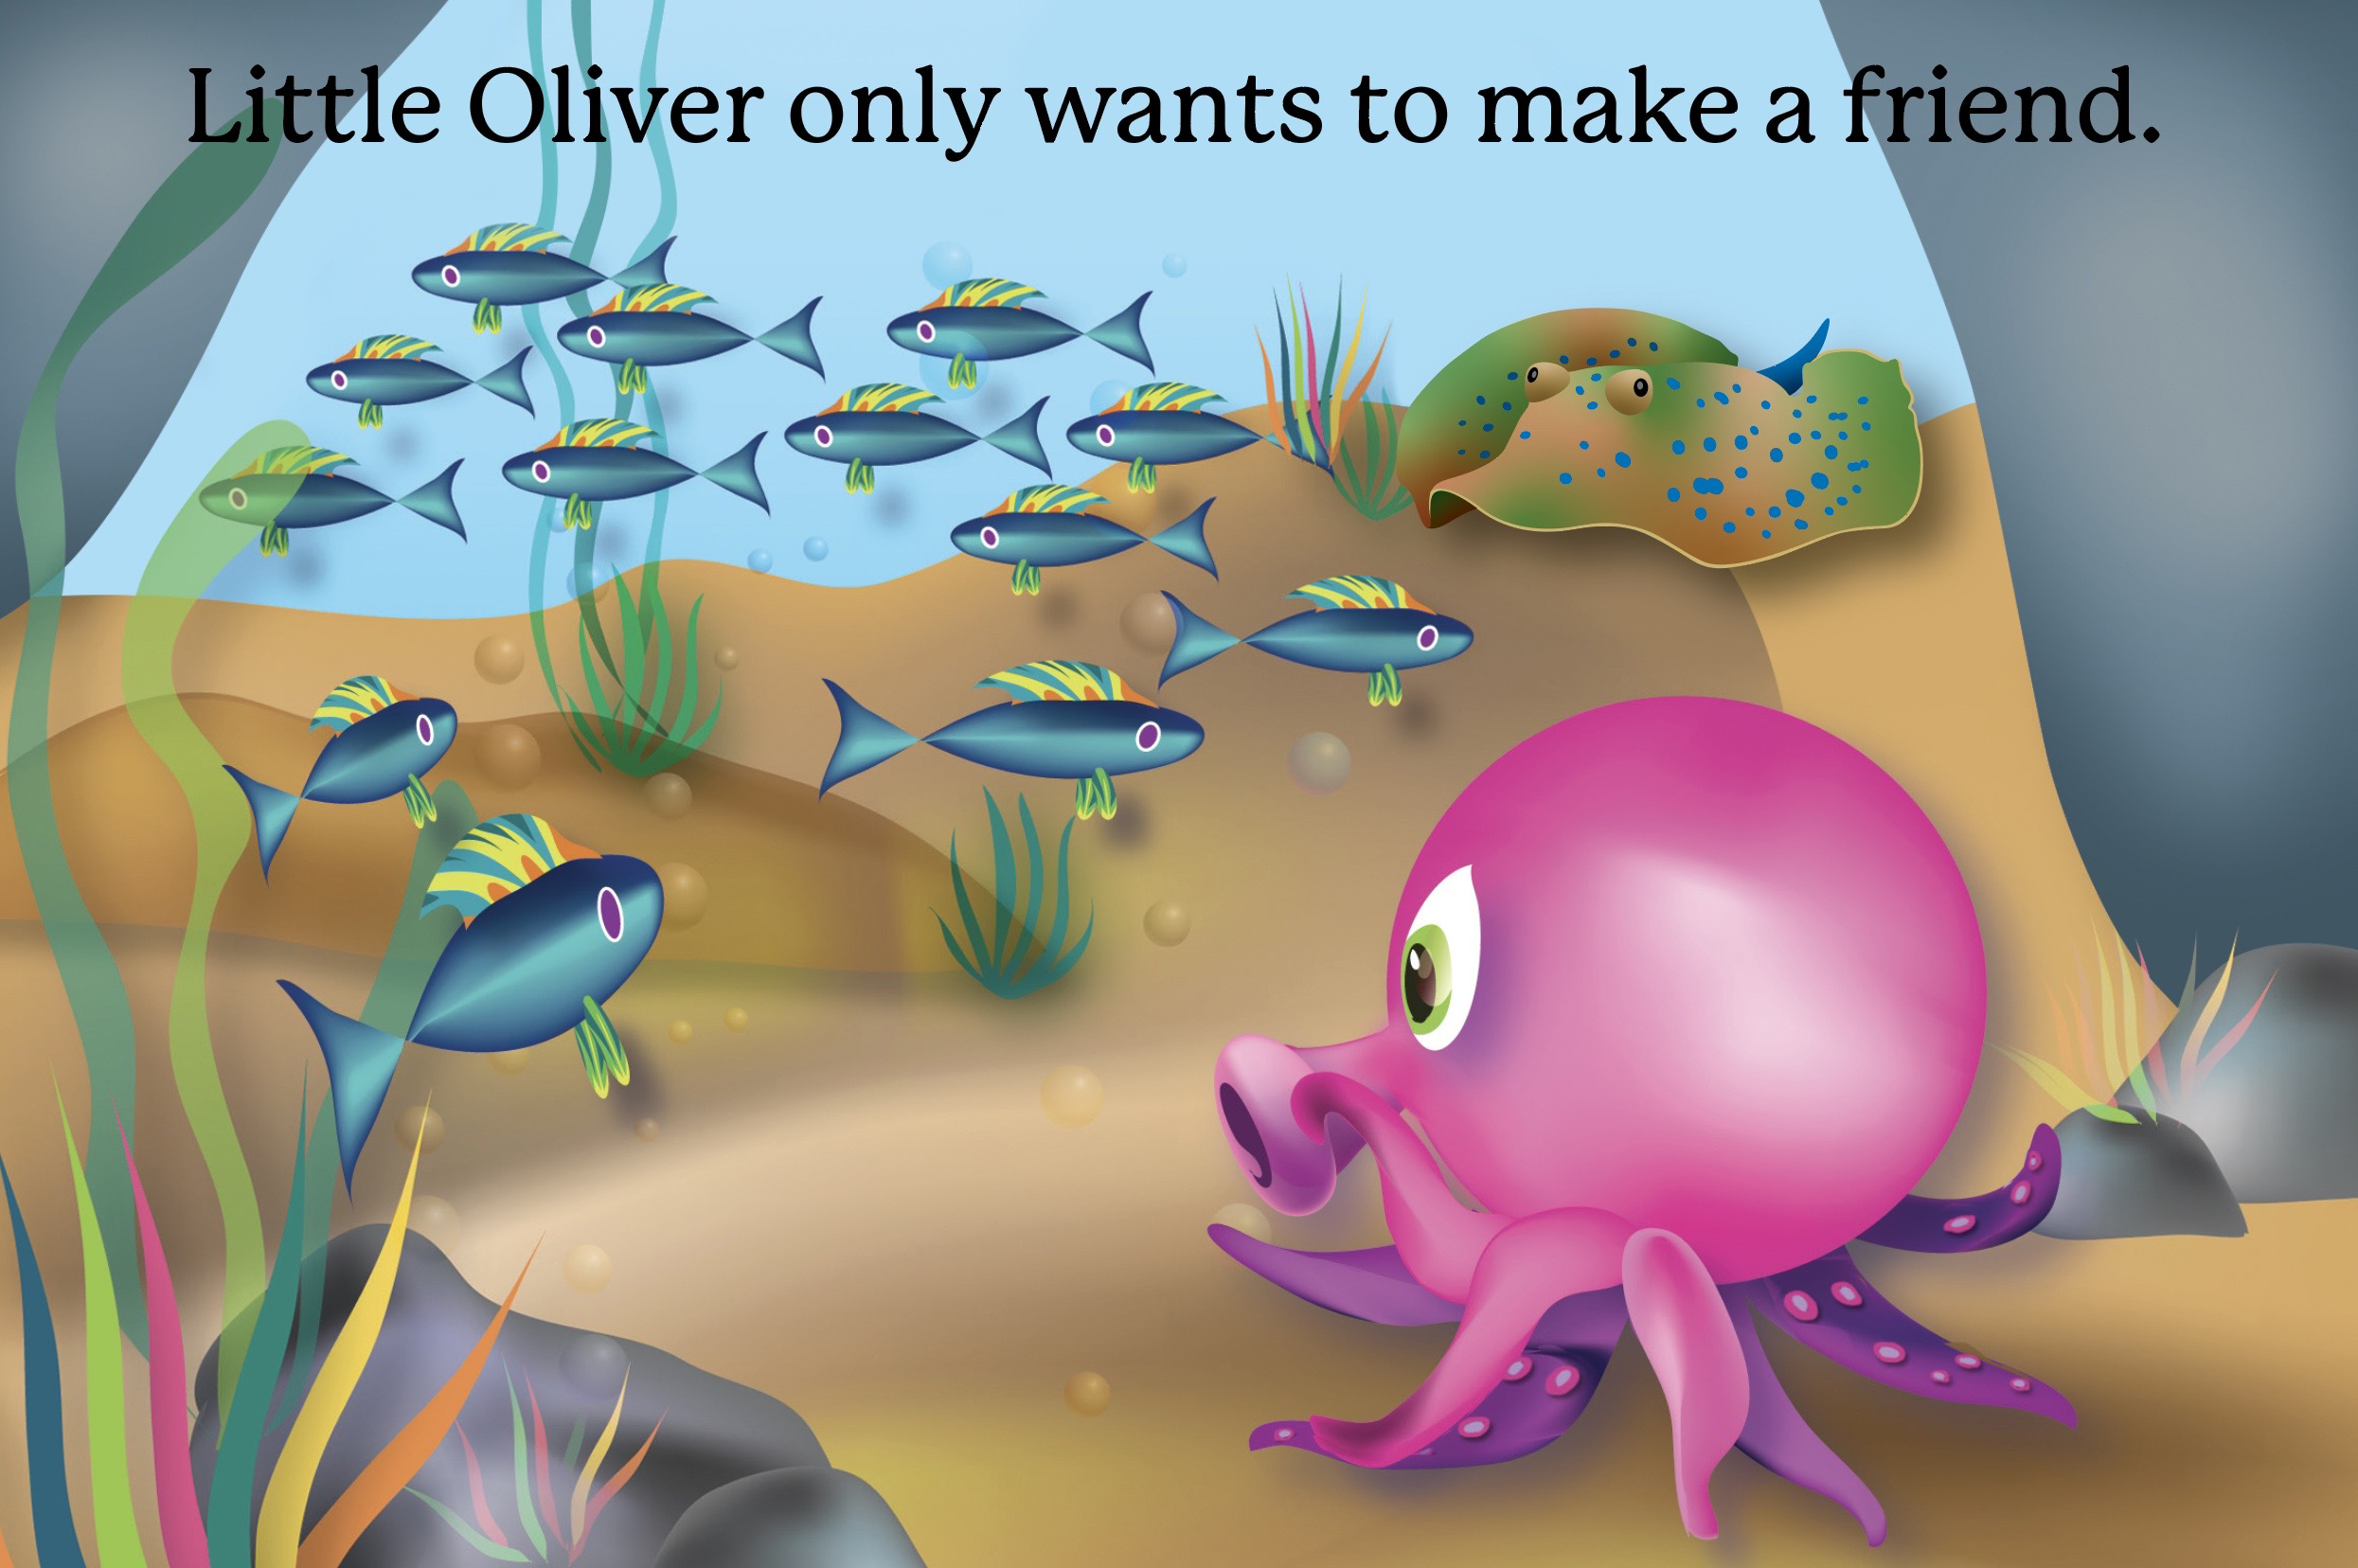 slide 3 Octopus Children's Book - Oliver the Octopus, by Bonnie Lady Lee. [Excerpt] Why can't the ocean be my happy home?